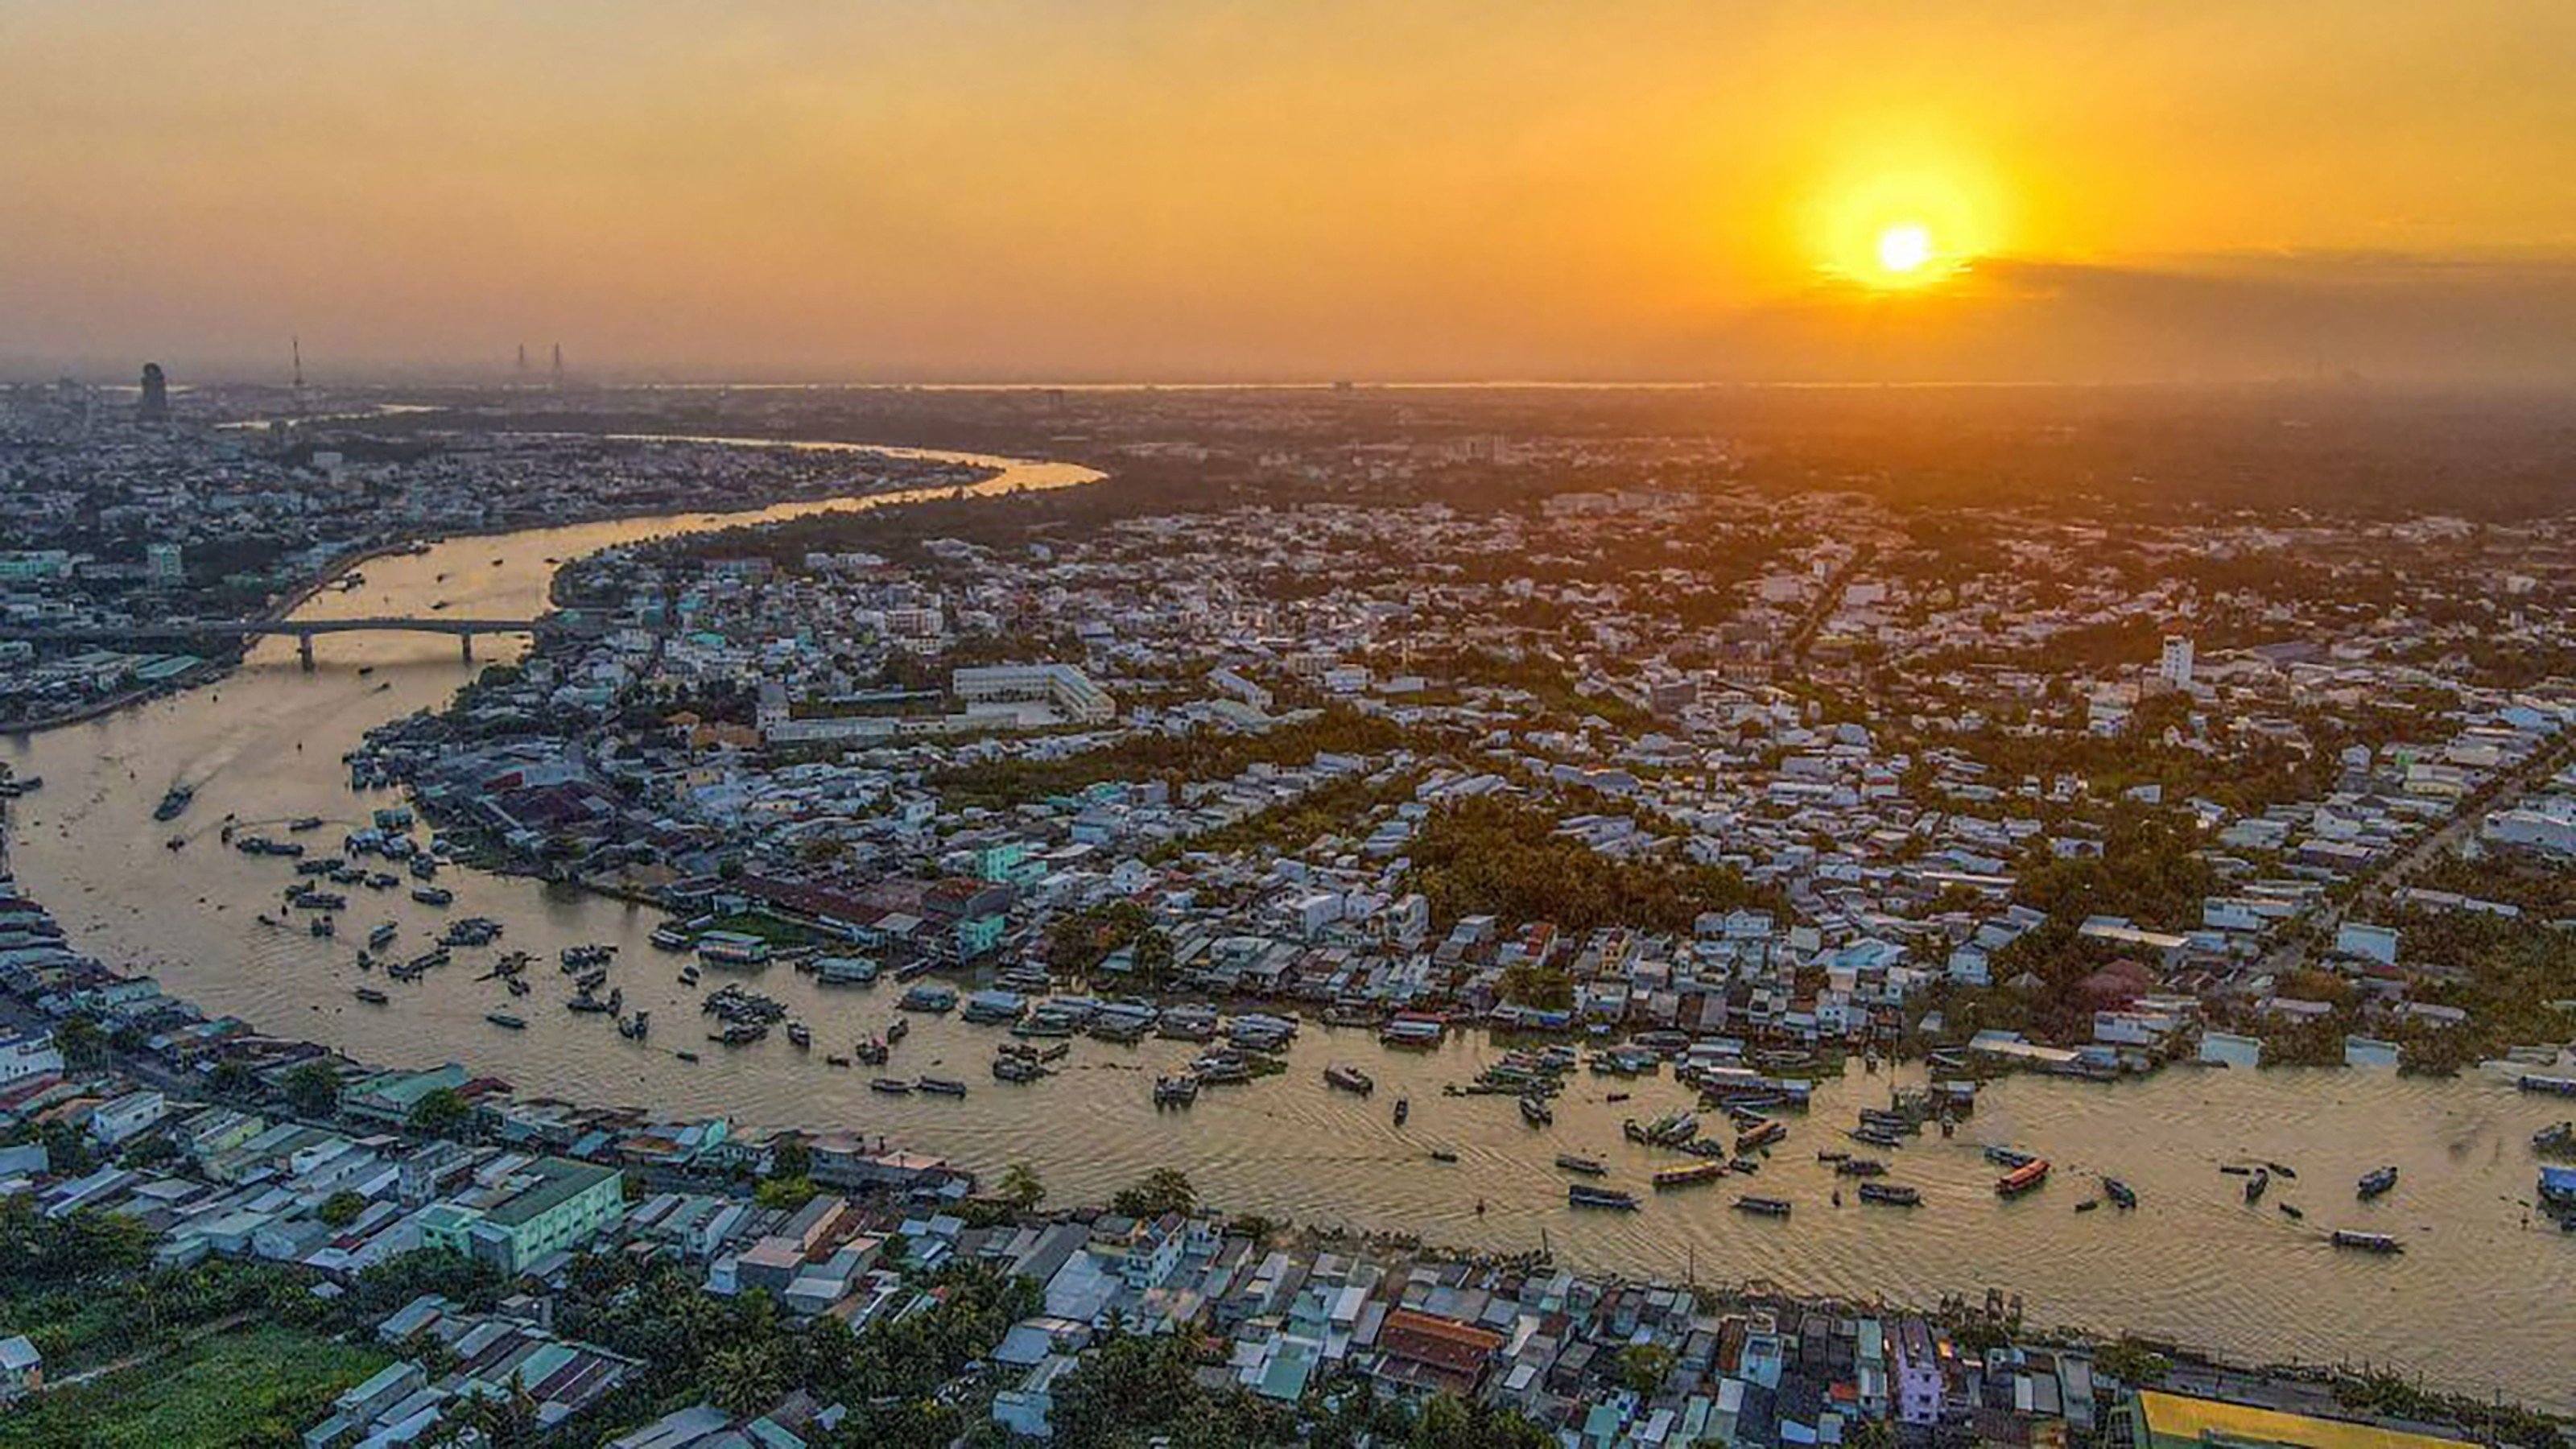 Mekong Delta is one of the Enchanting tourist destinations in Southern Vietnam